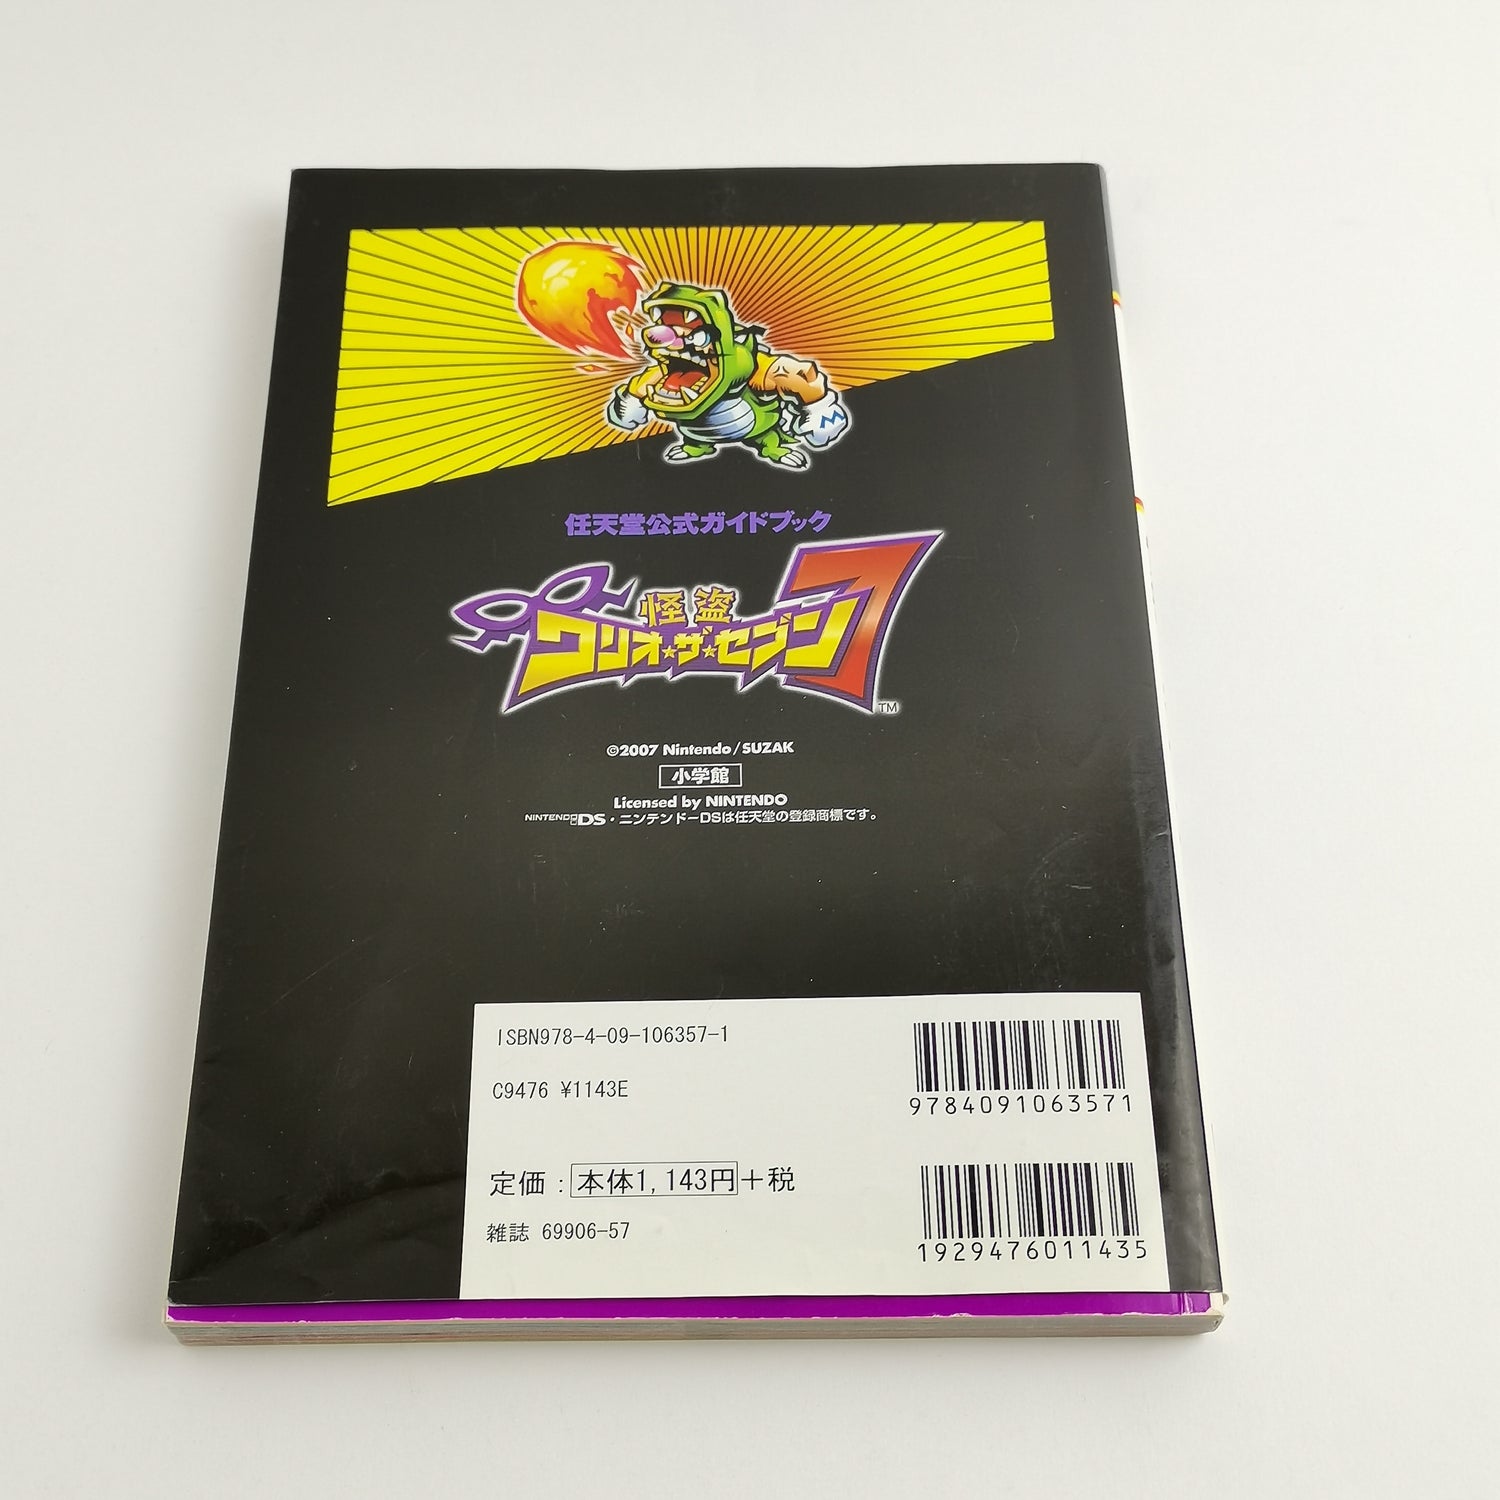 Japanese Nintendo DS Guide : Wario master of disguise - JAPAN | Solution book